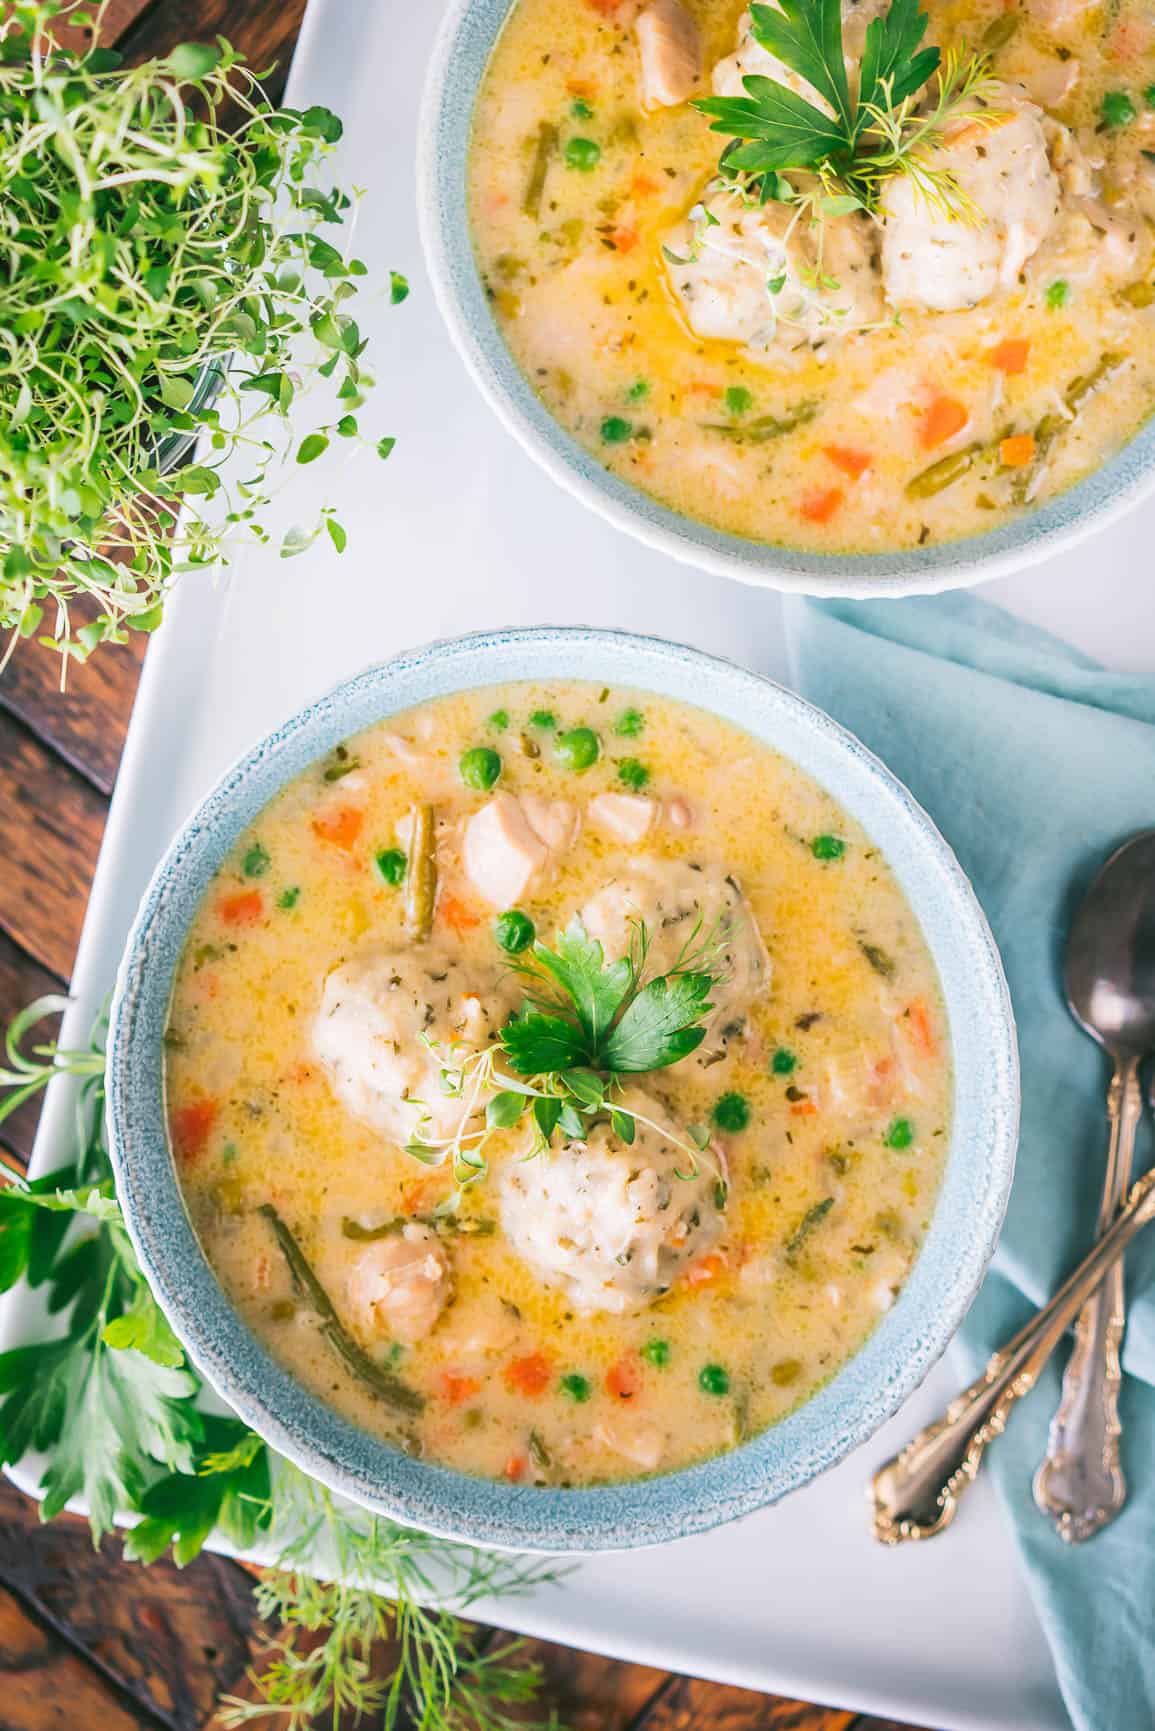 Chicken and Dumplings made with Einkorn Flour